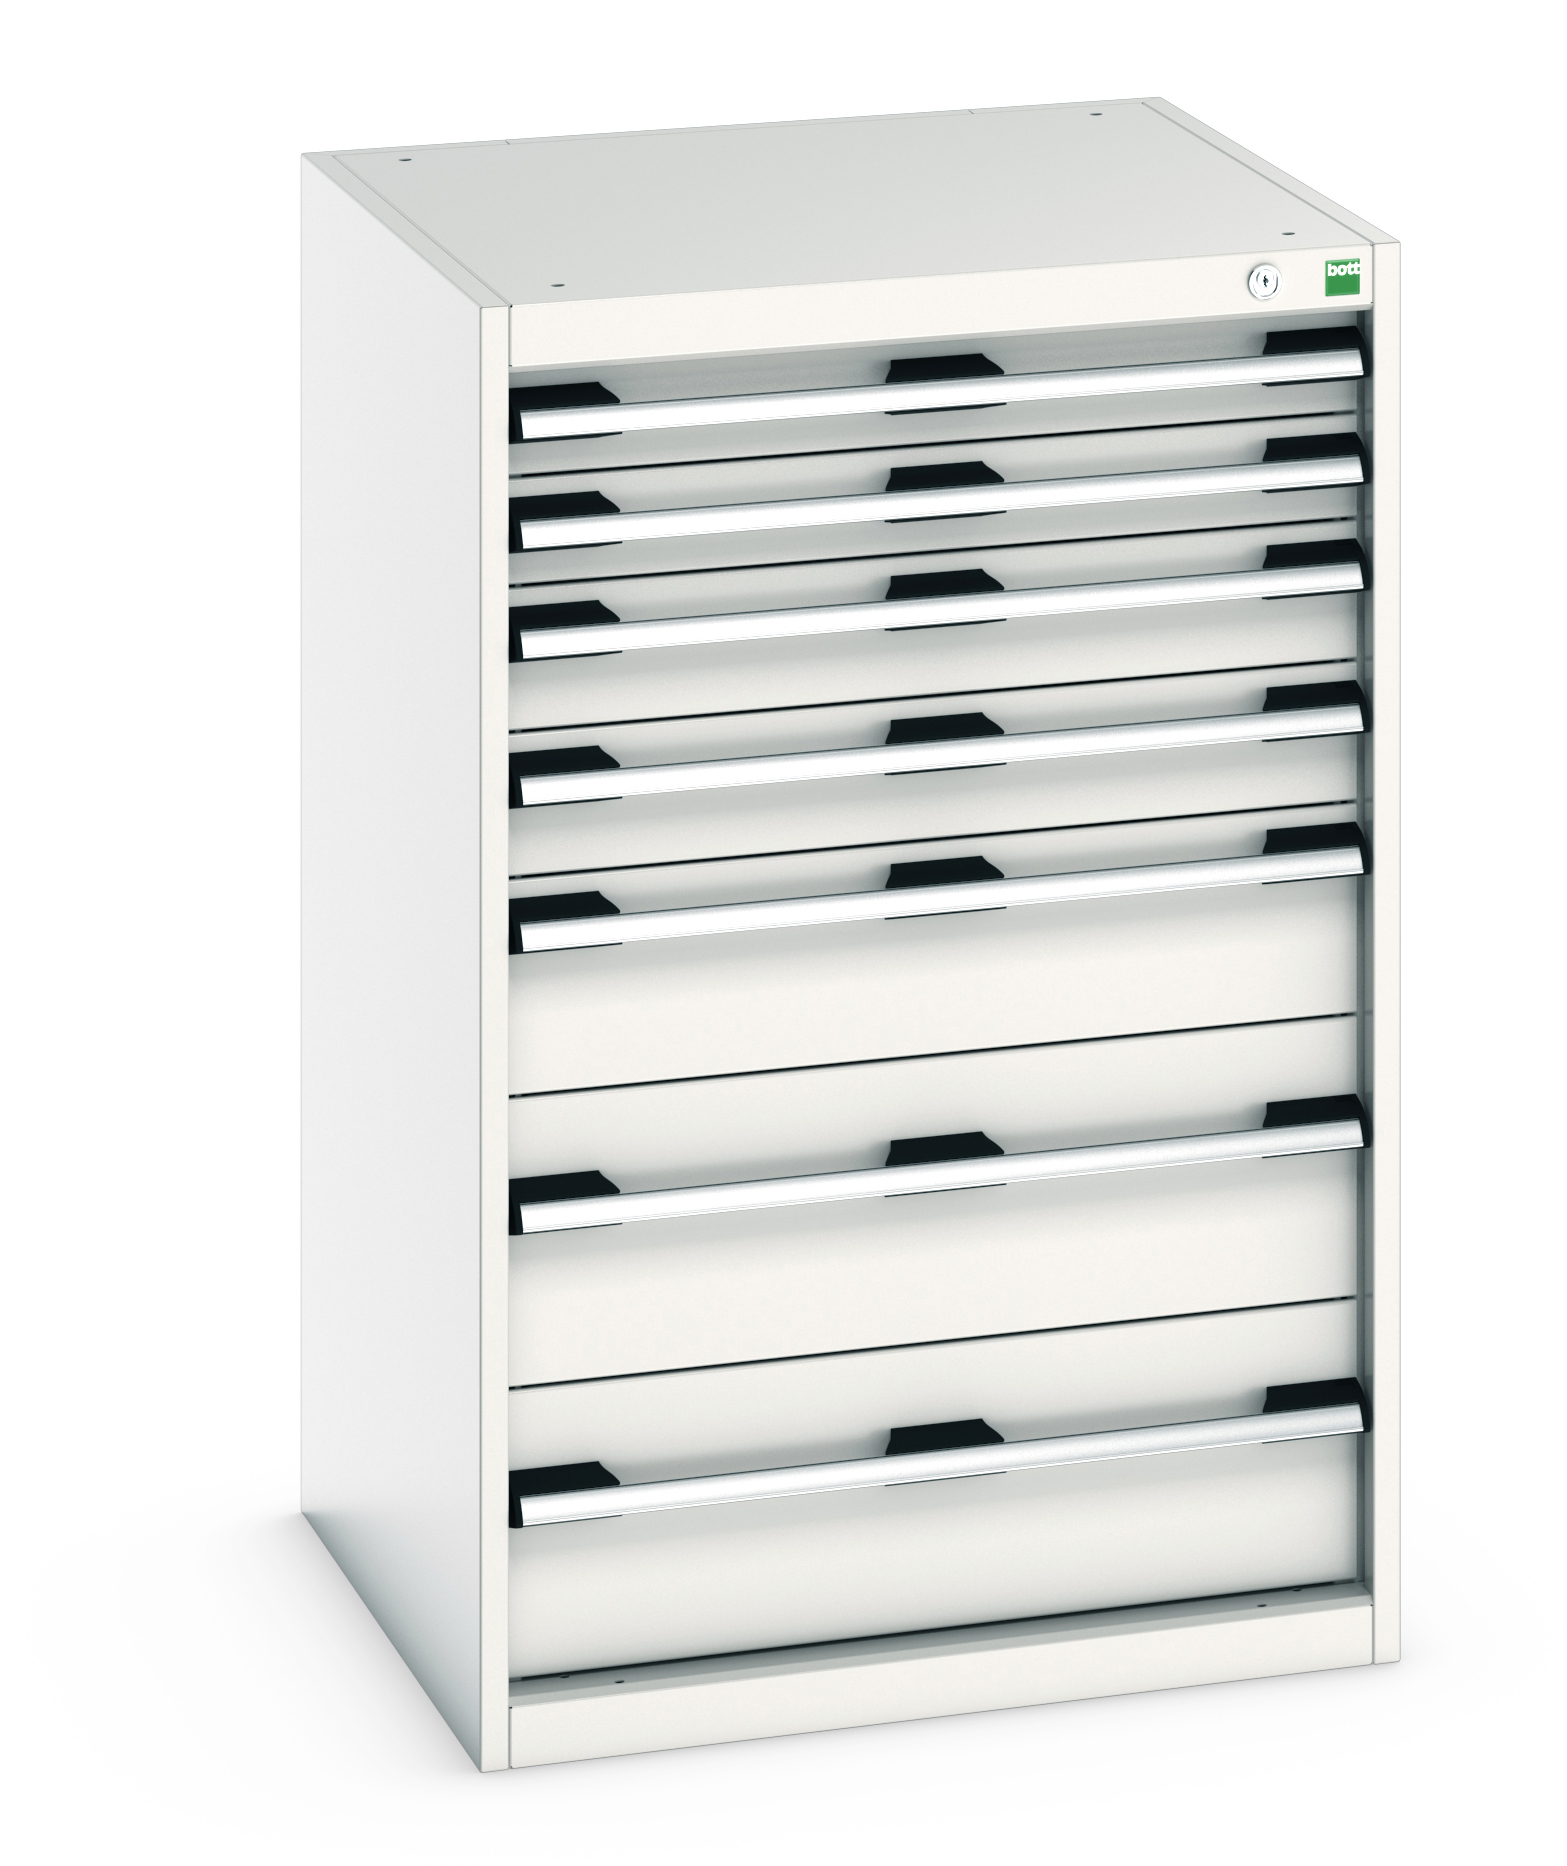 Bott Cubio Drawer Cabinet With 7 Drawers - 40019063.16V